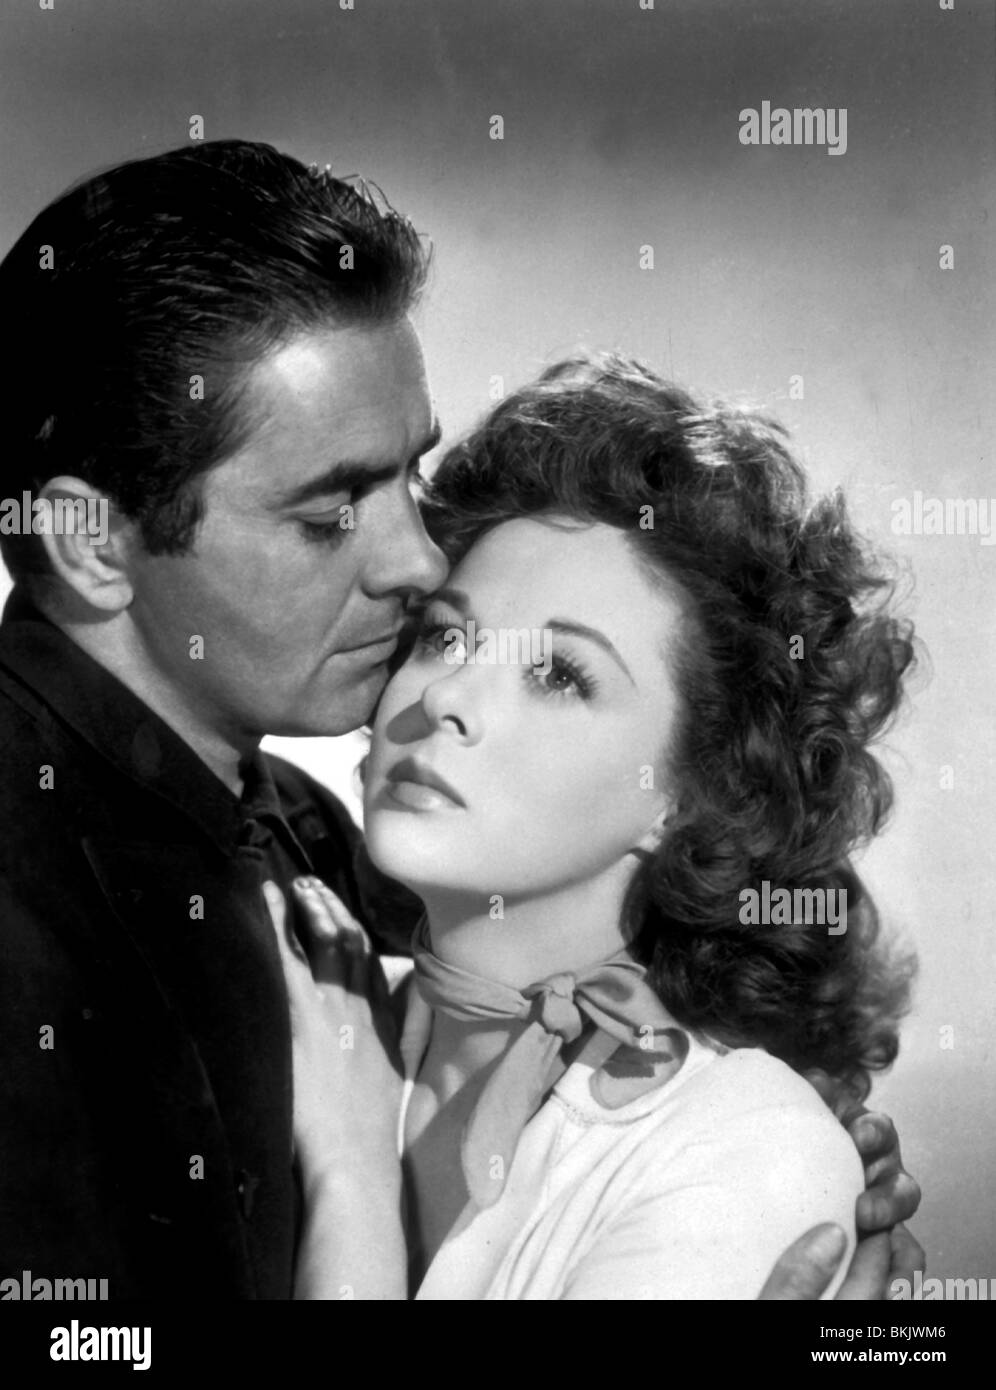 RAWHIDE (1950) Tyrone Power, SUSAN HAYWARD RWHD 004 Banque D'Images